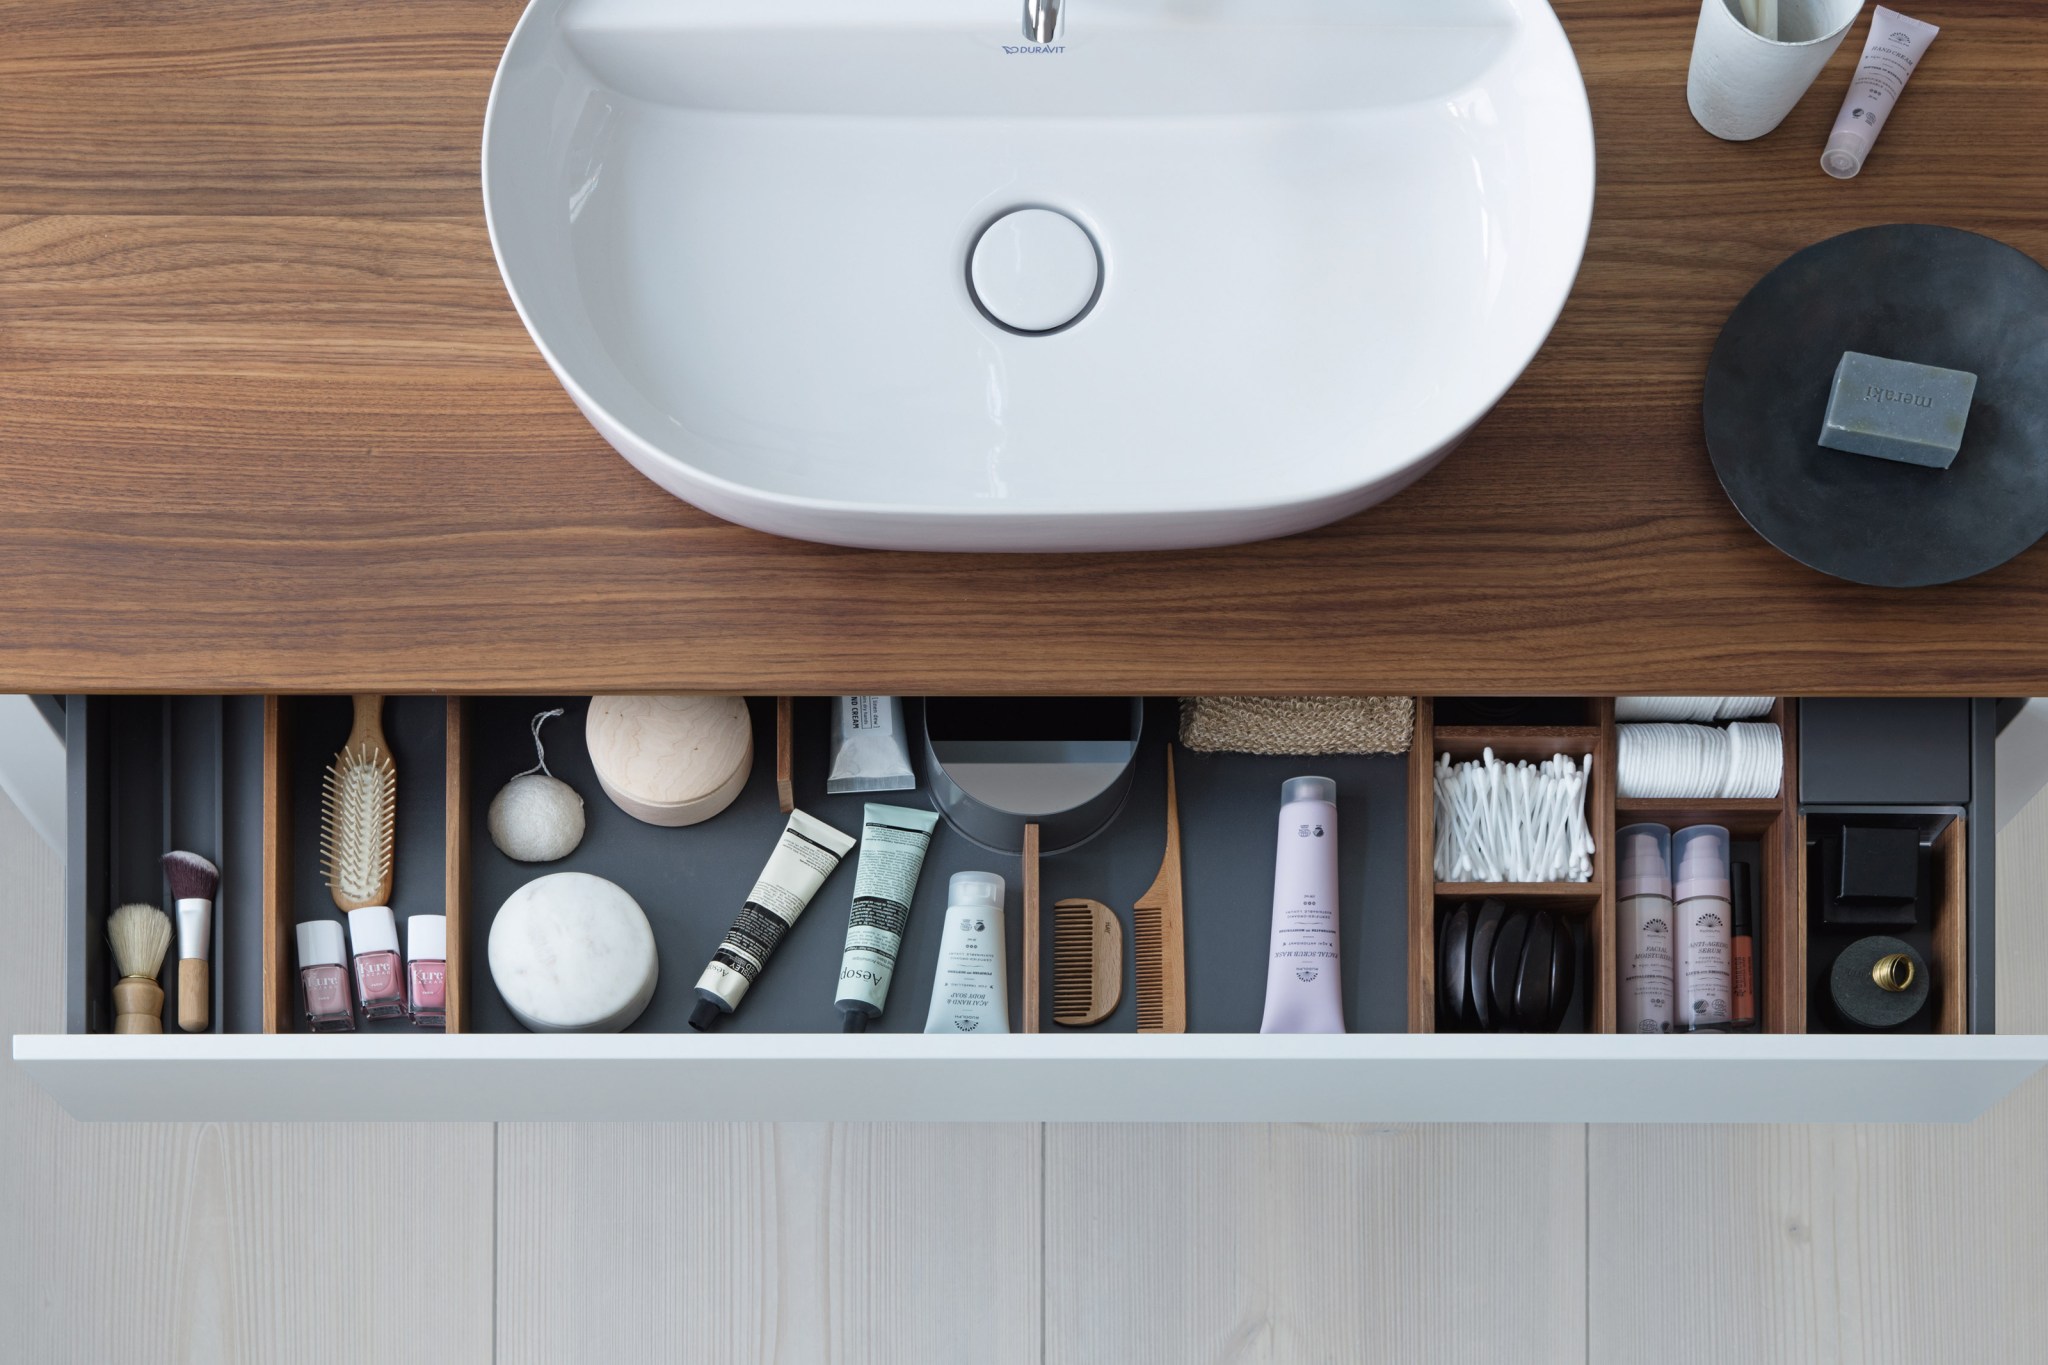 6 Under-Sink Storage Ideas That Will Bring Peace to Your Bathroom